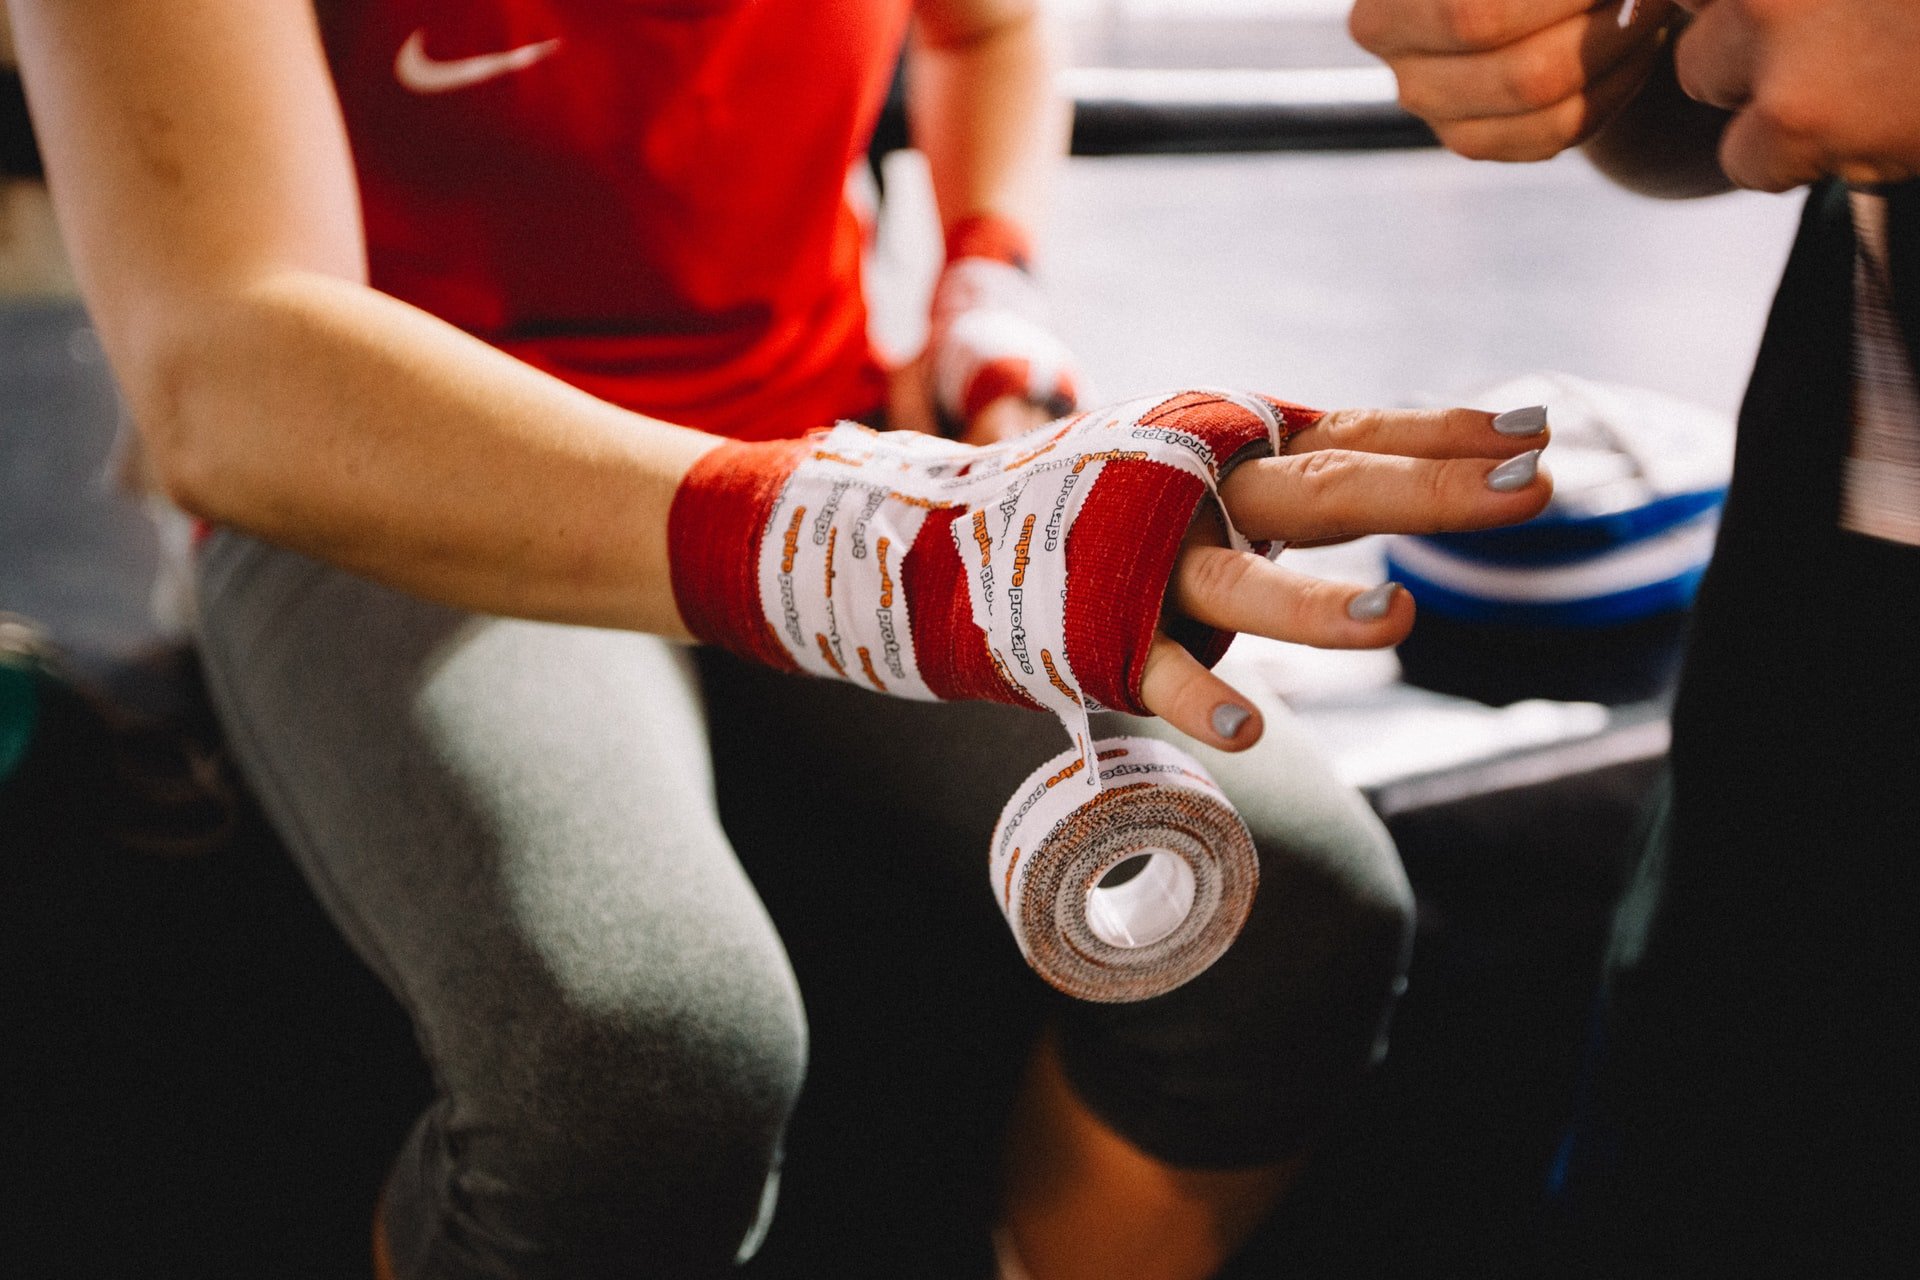 Eventually, Norah started going to therapy and formed a girls' arm-wrestling team, which increased her confidence. | Source: Unsplash